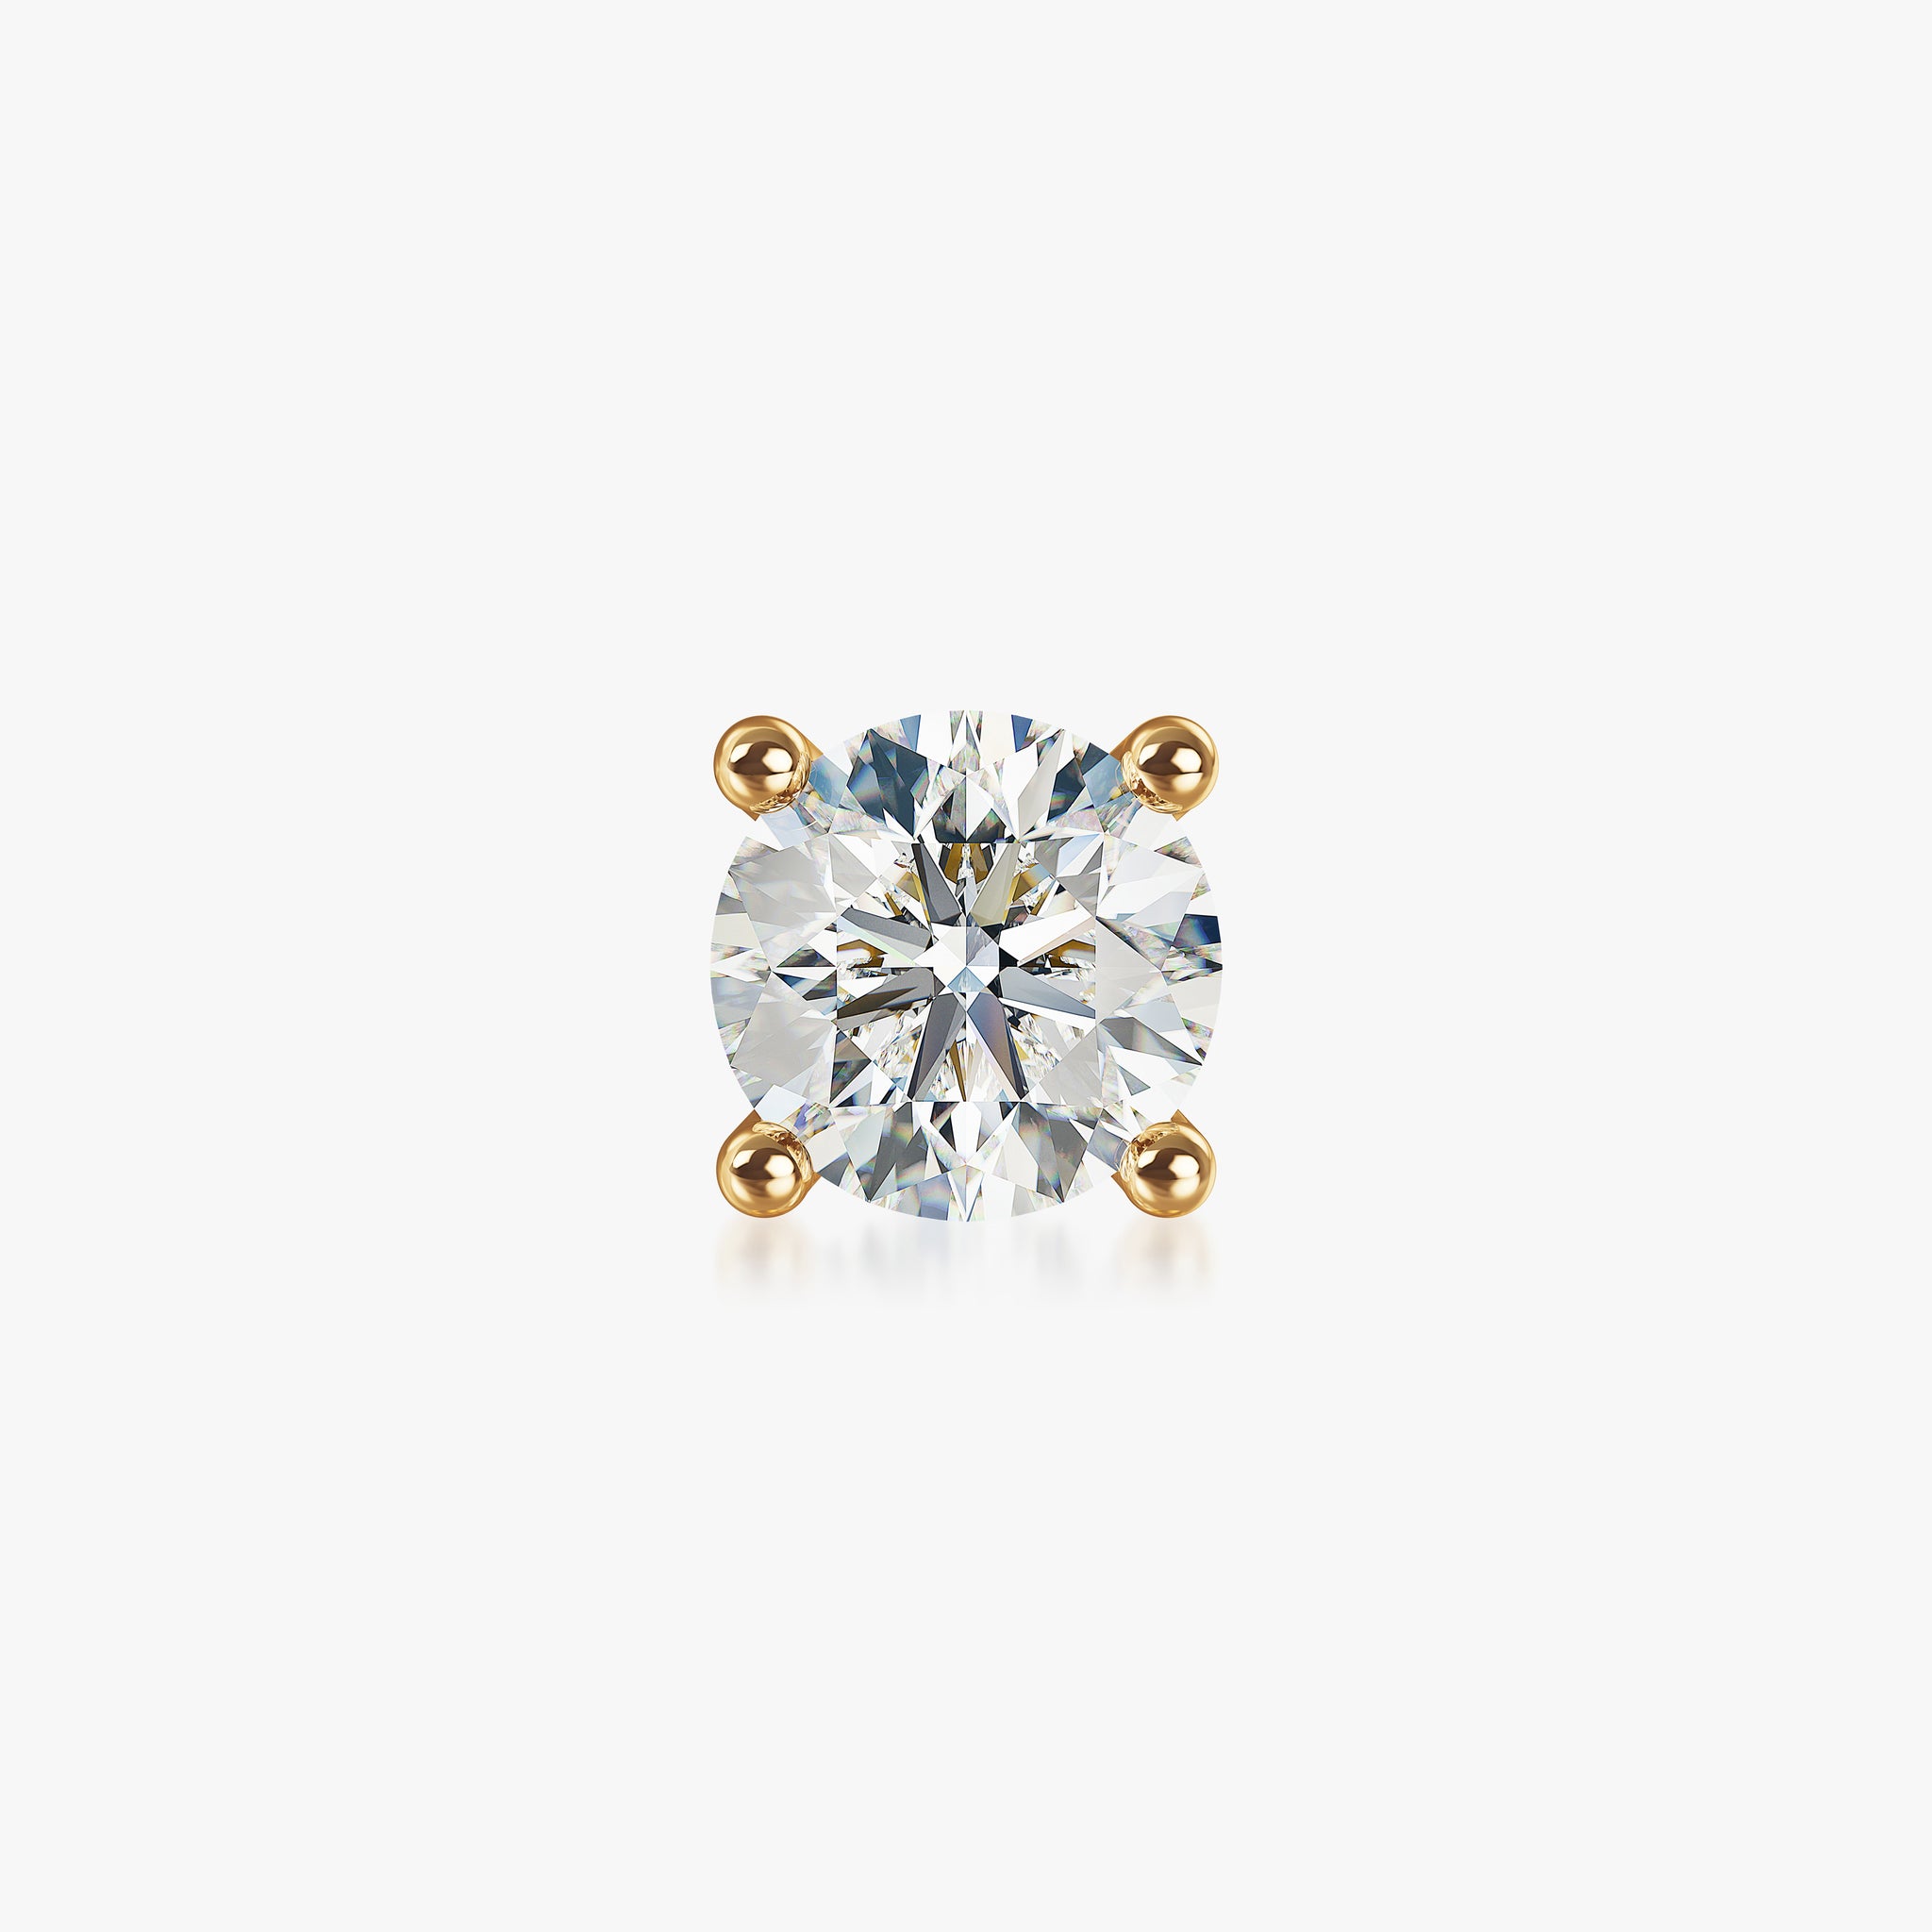 J'EVAR 18KT Yellow Gold ALTR Lab Grown Diamond Single Stud Earring with Guardian Backs Front View